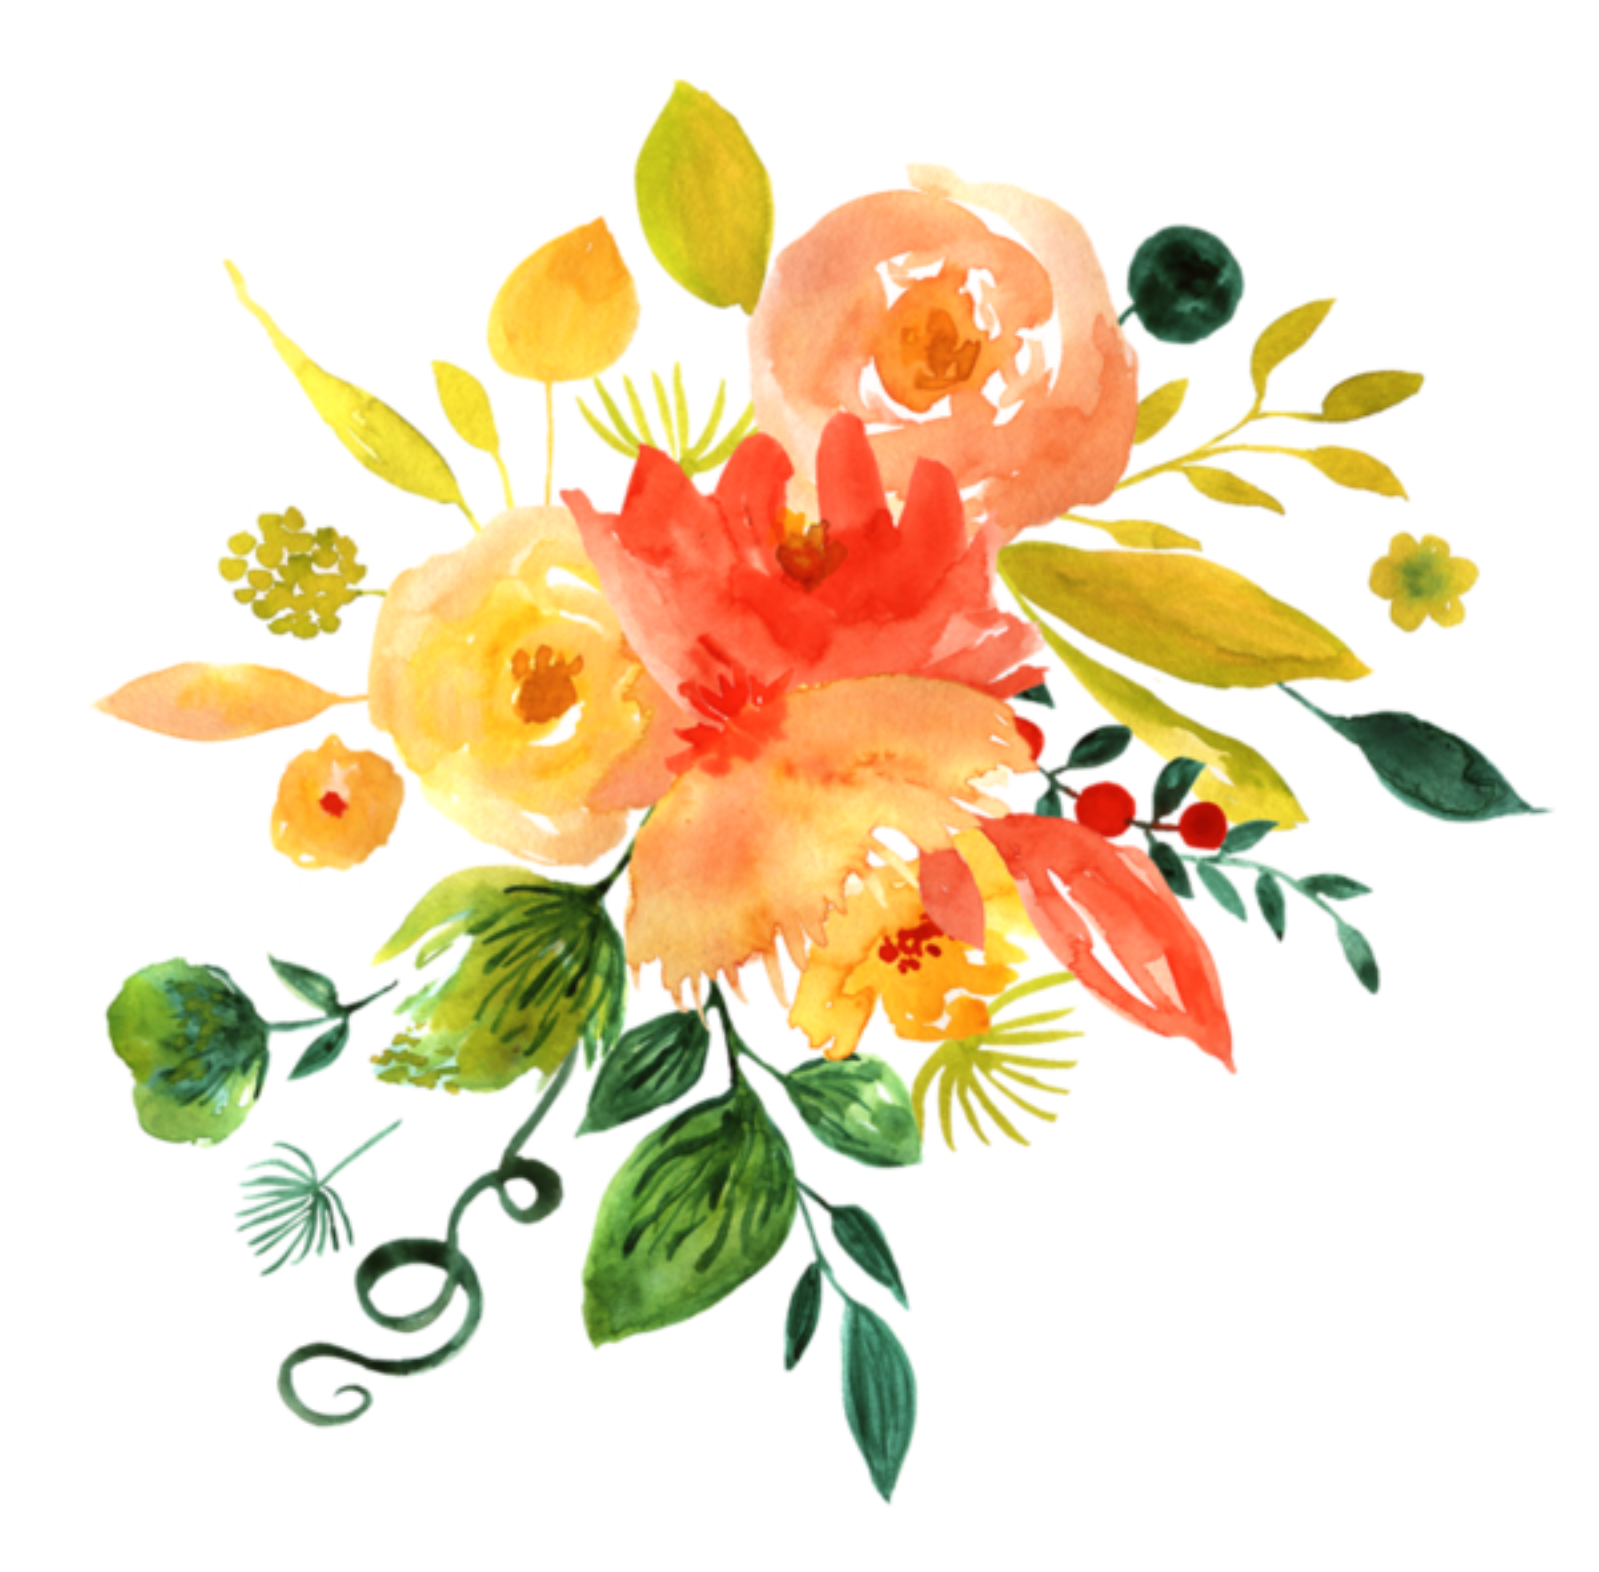 View Transparent Background Aesthetic Watercolor Flower Png Gif